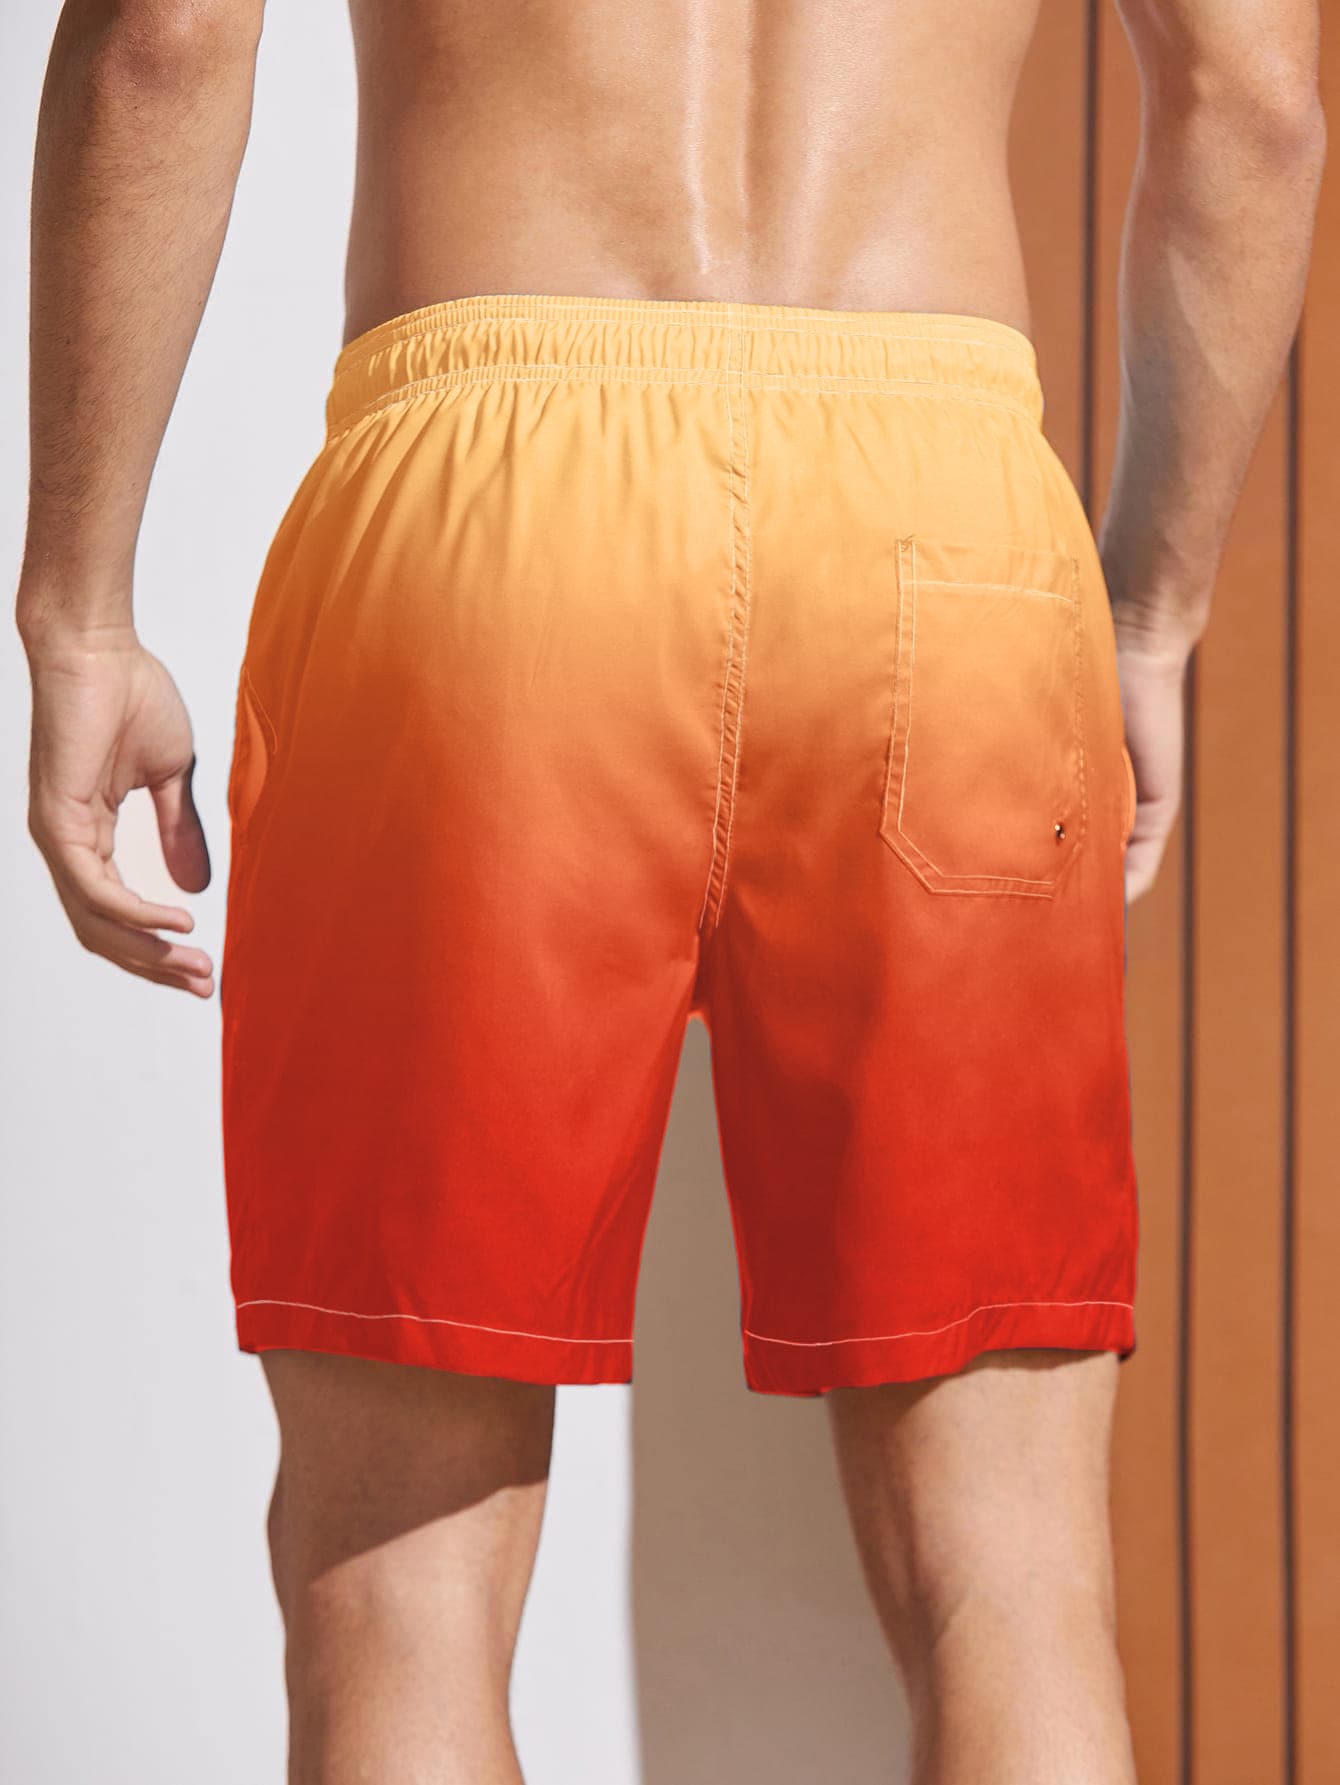 Drawstring Waist Swim Trunks: The Perfect Blend of Style and Comfort